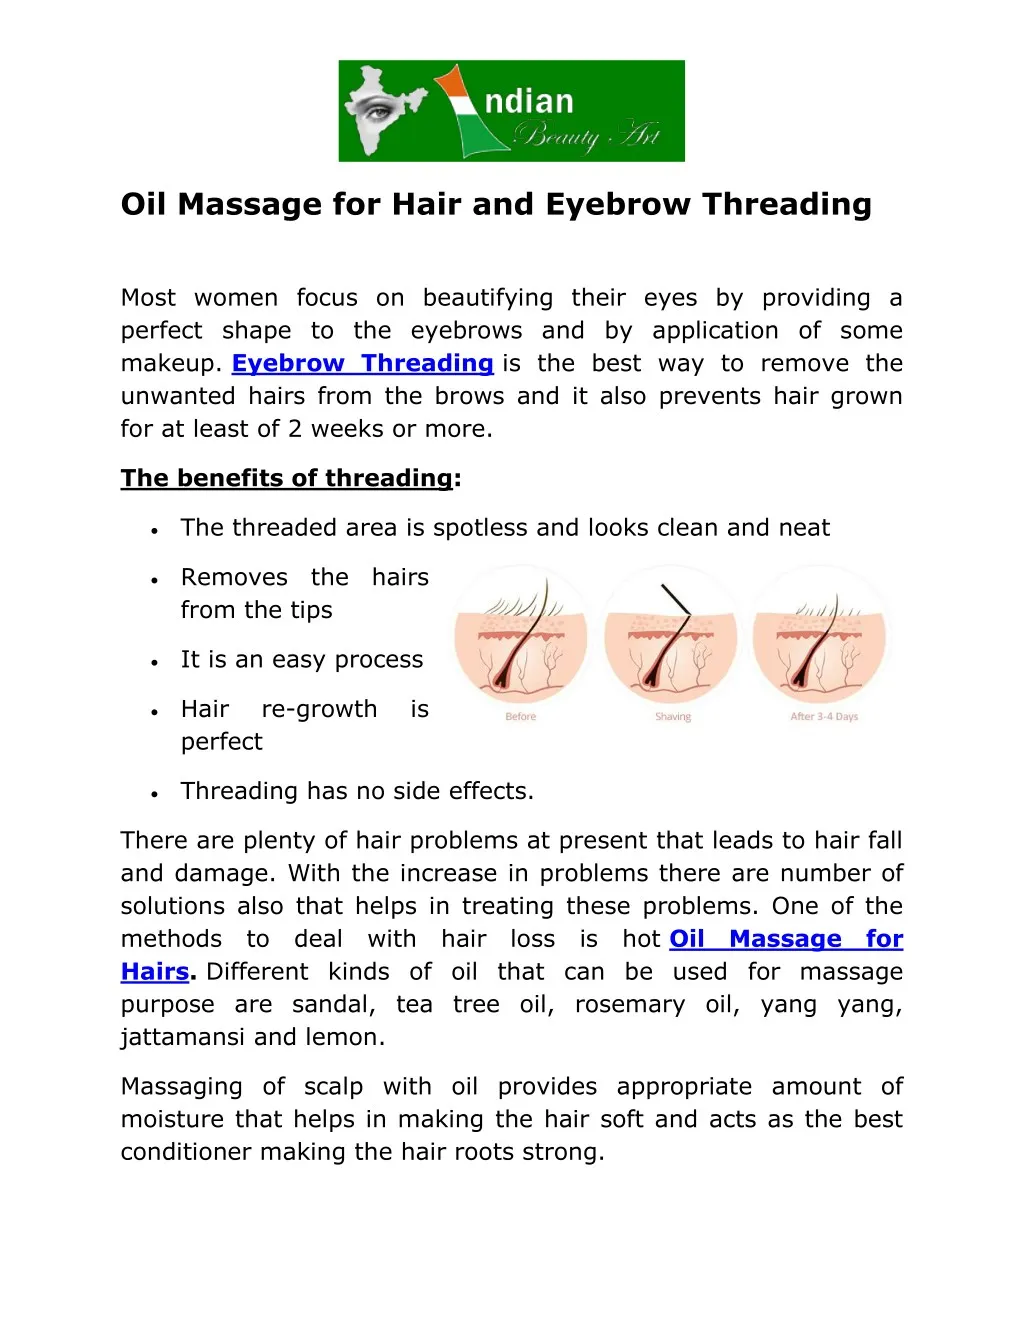 oil massage for hair and eyebrow threading